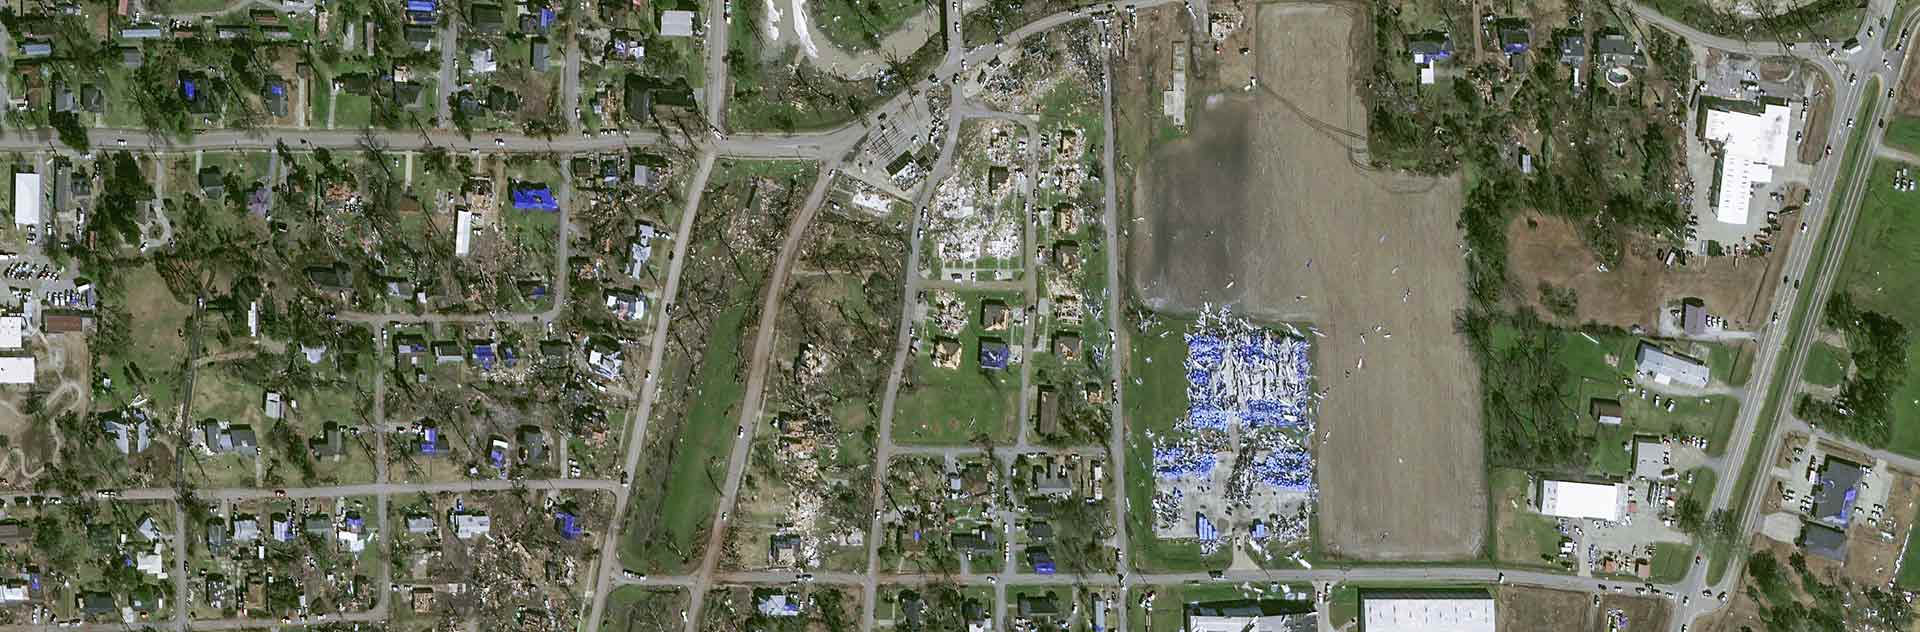 30cm resolution Pléiades Neo satellite captured storm aftermath in the city of Rolling Fork, Mississippi, United States.